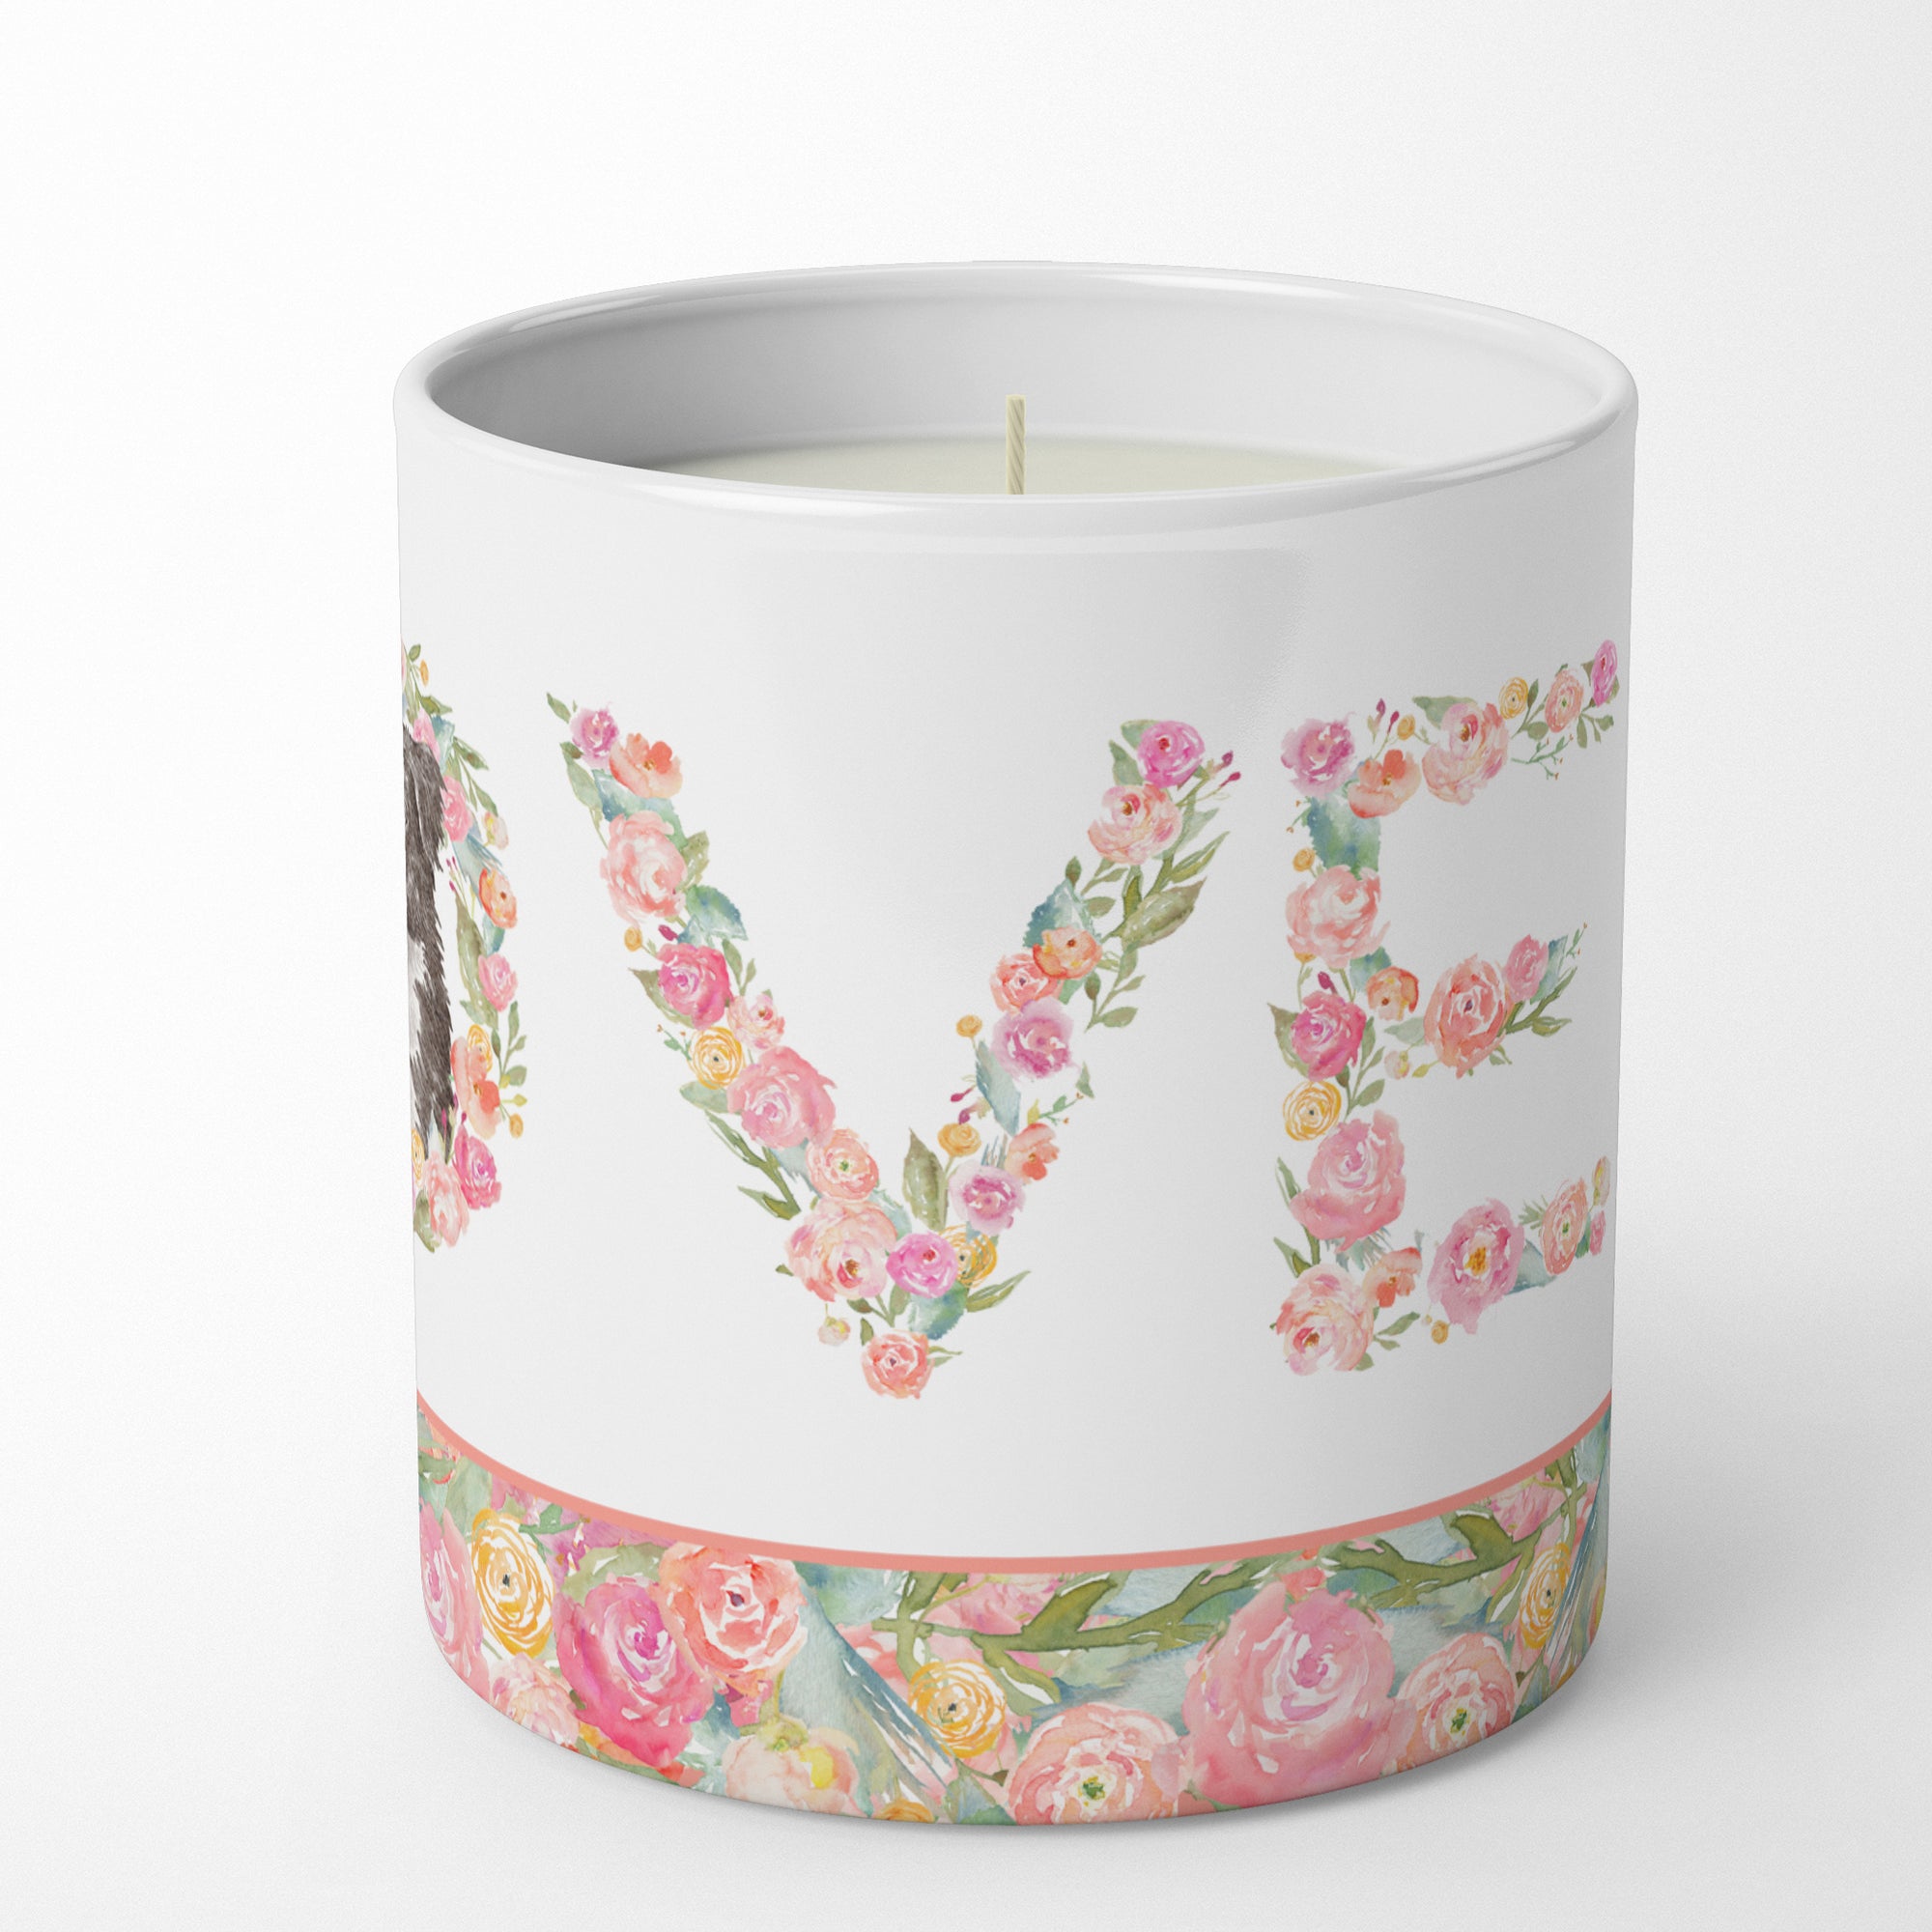 Border Collie #5 Love 10 oz Decorative Soy Candle - the-store.com